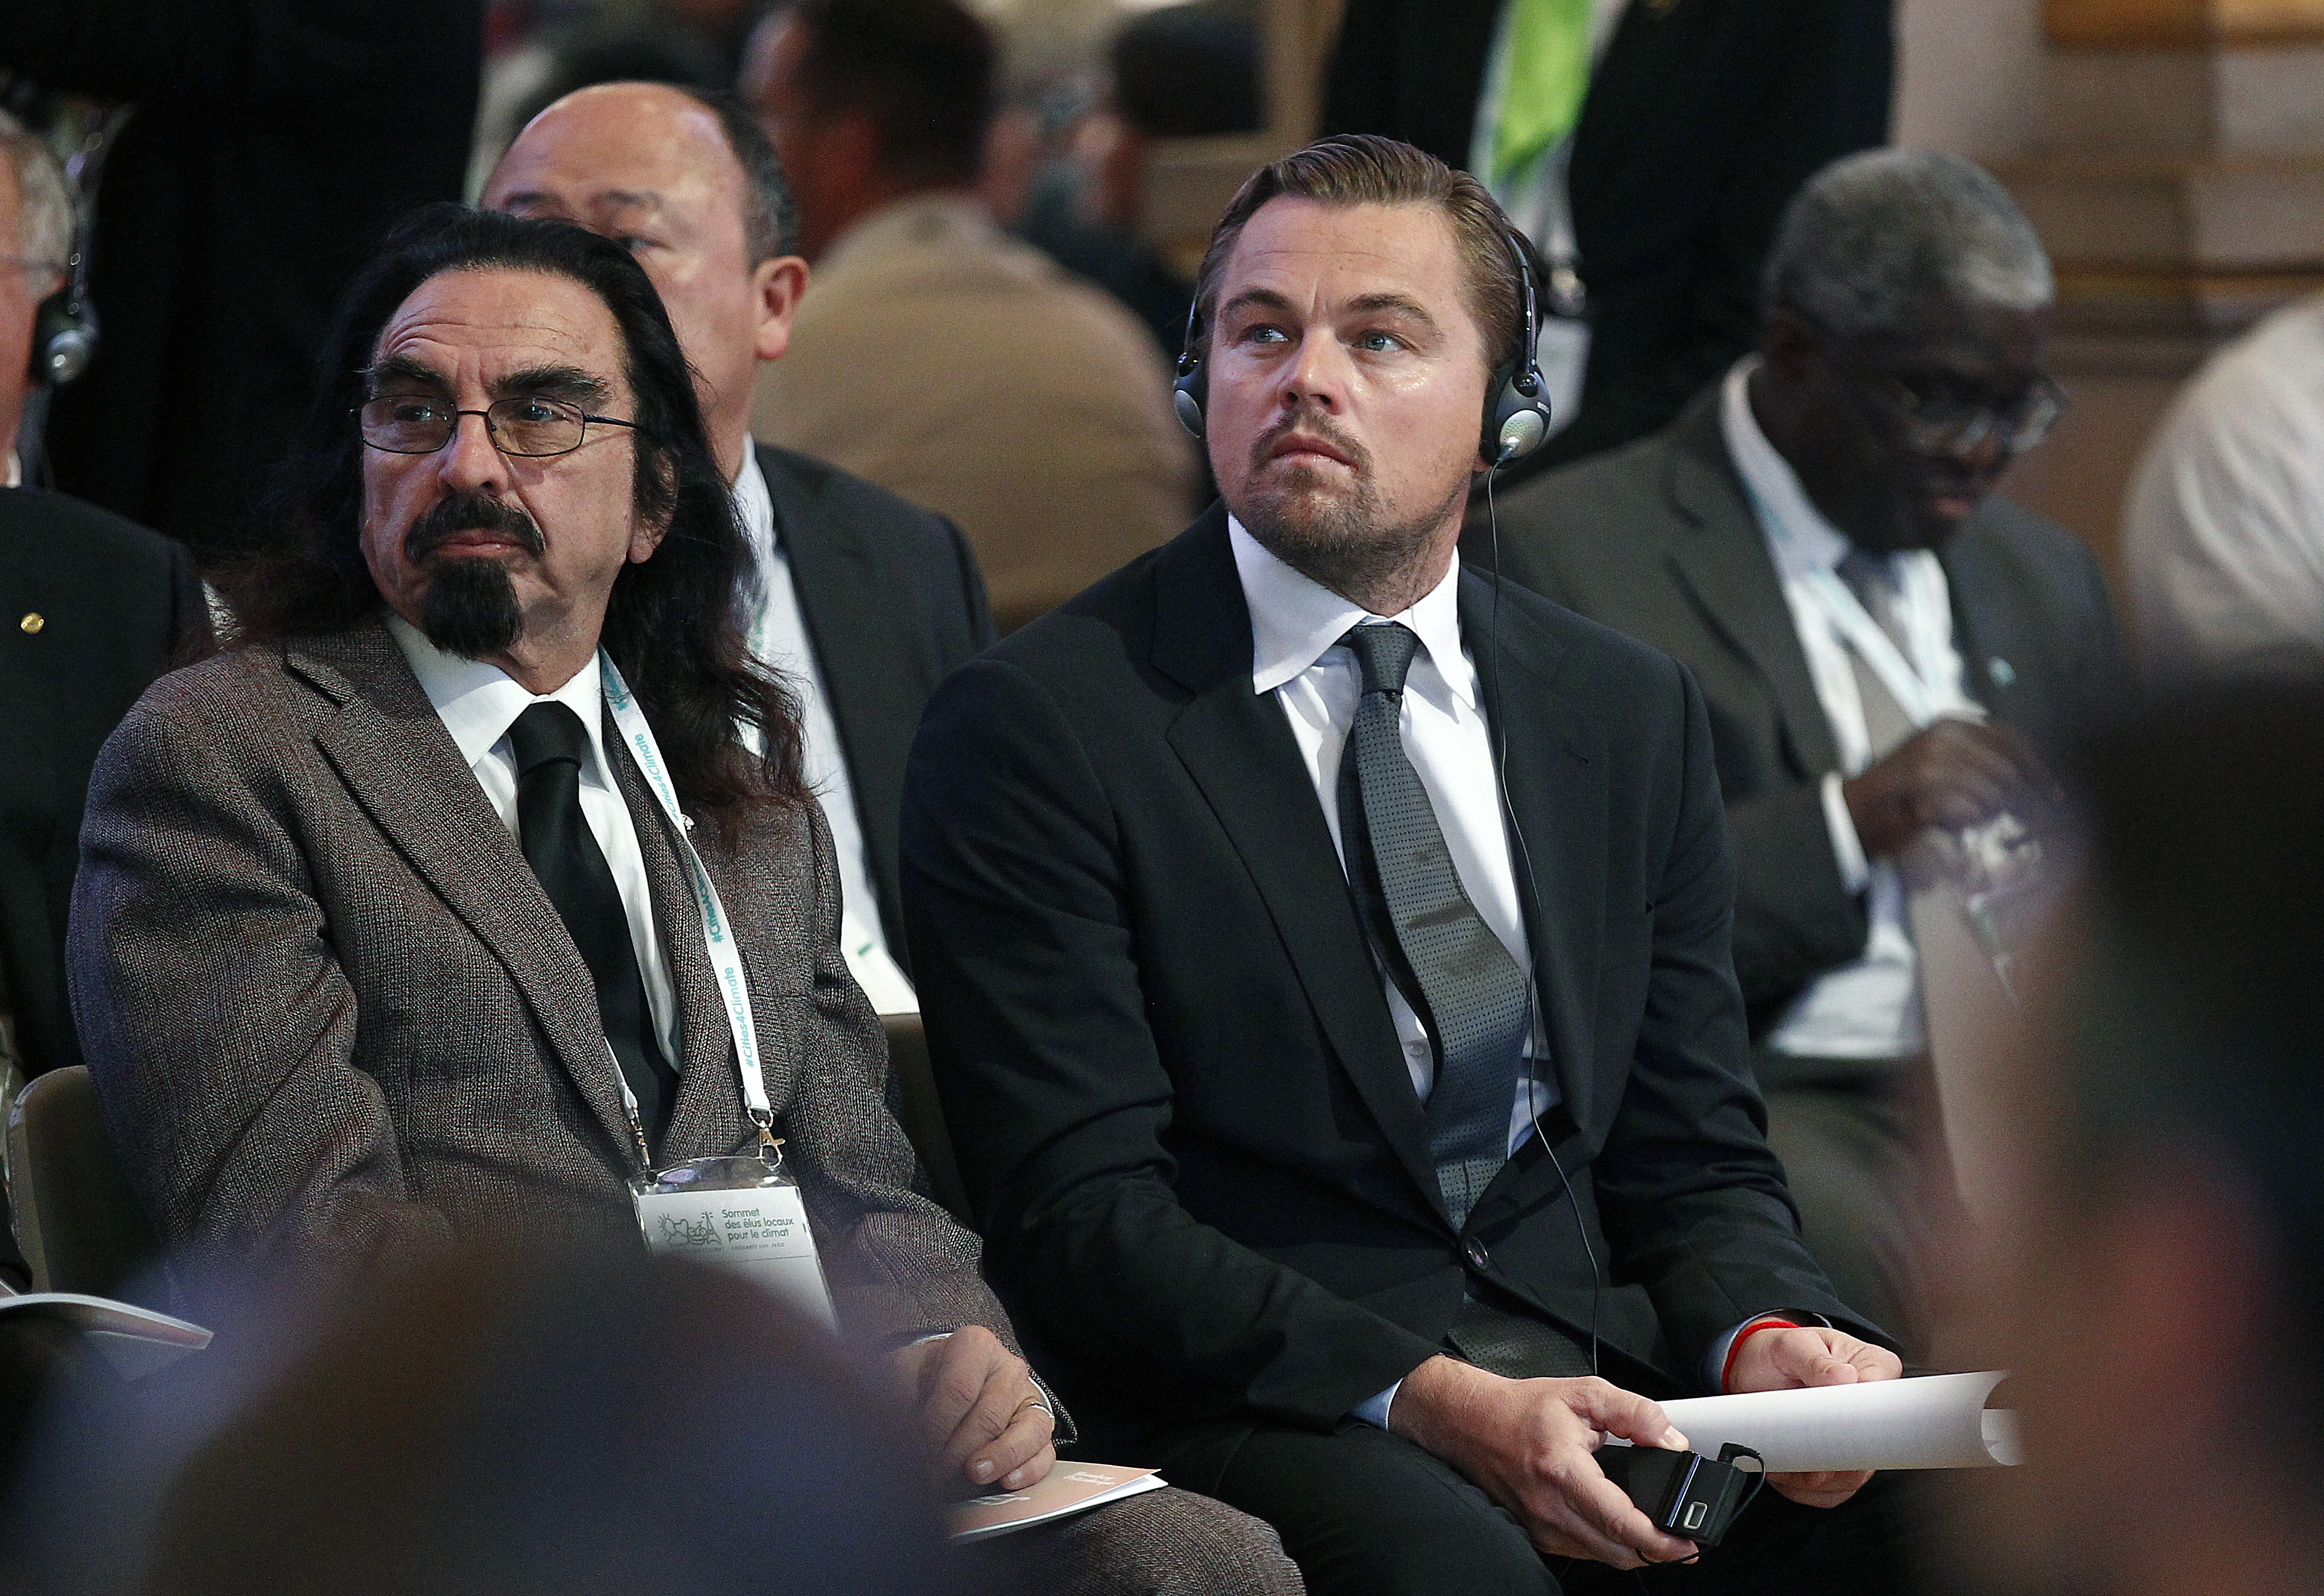 Leonardo DiCaprio and his father George DiCaprio attend a conference on climate change on December 4, 2015 in Paris, France | Source: Getty Images